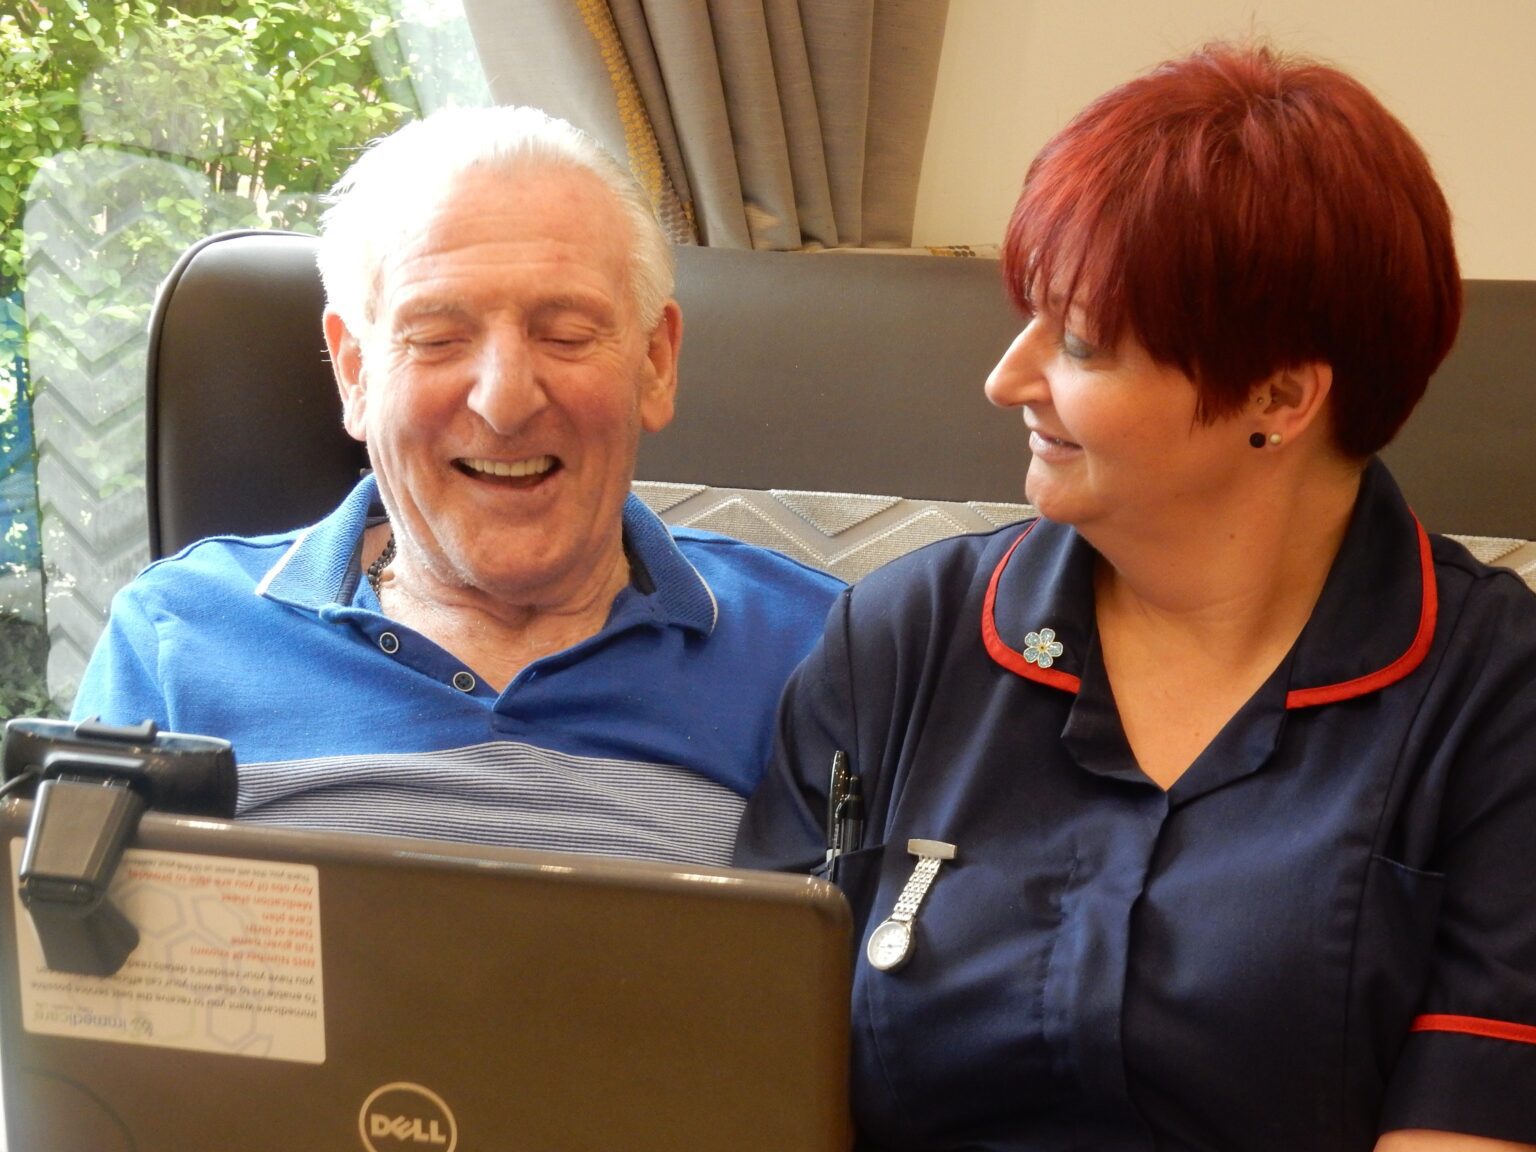 How does the use of telemedicine help care home residents?